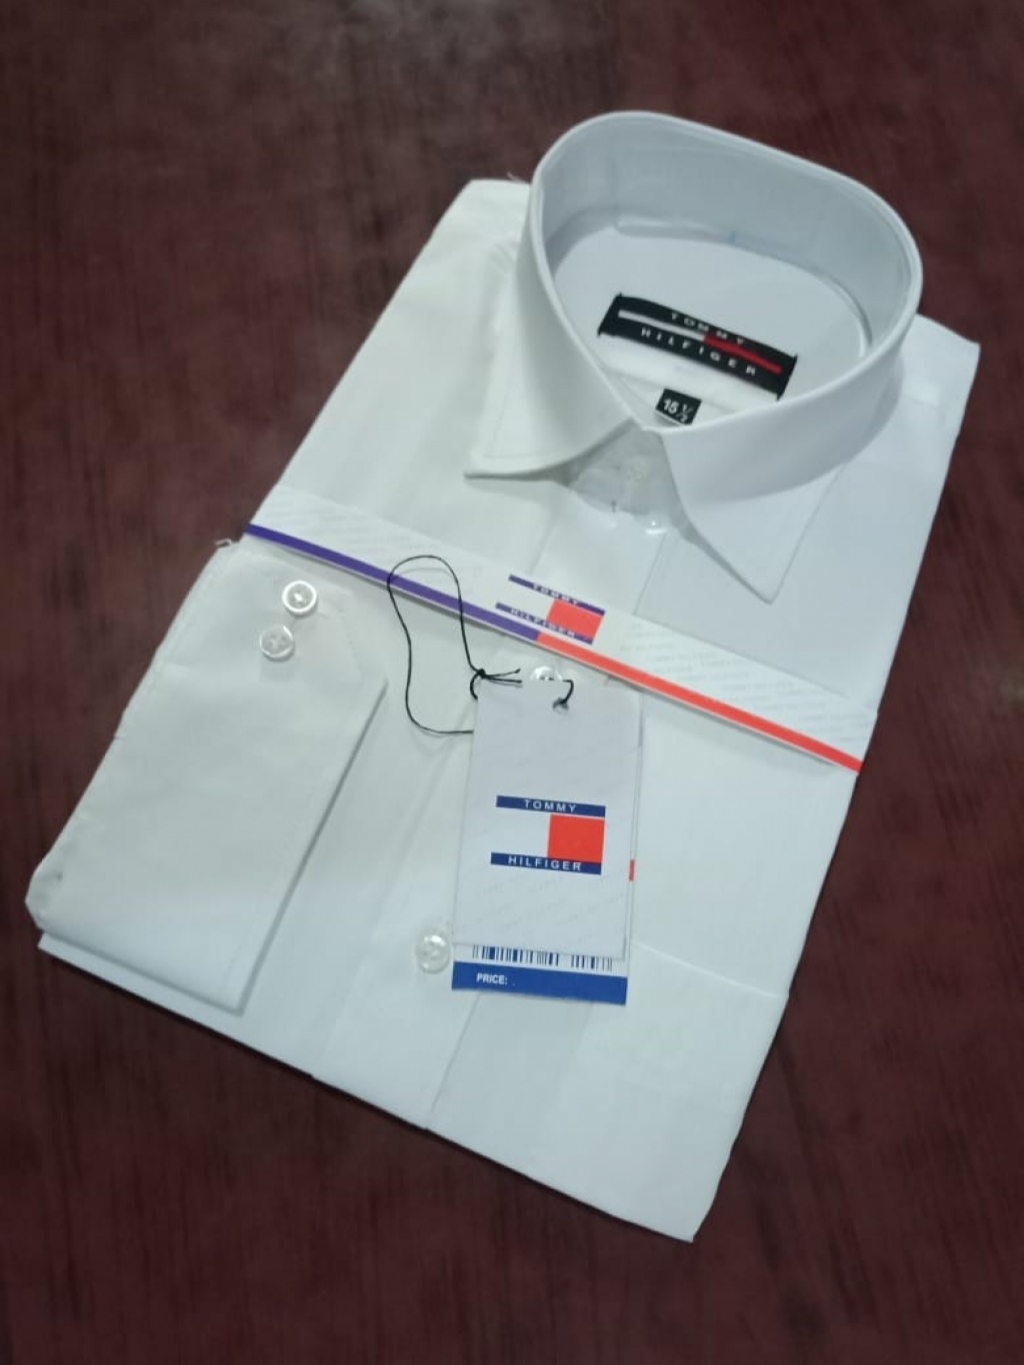 tommy hilfiger clothes price